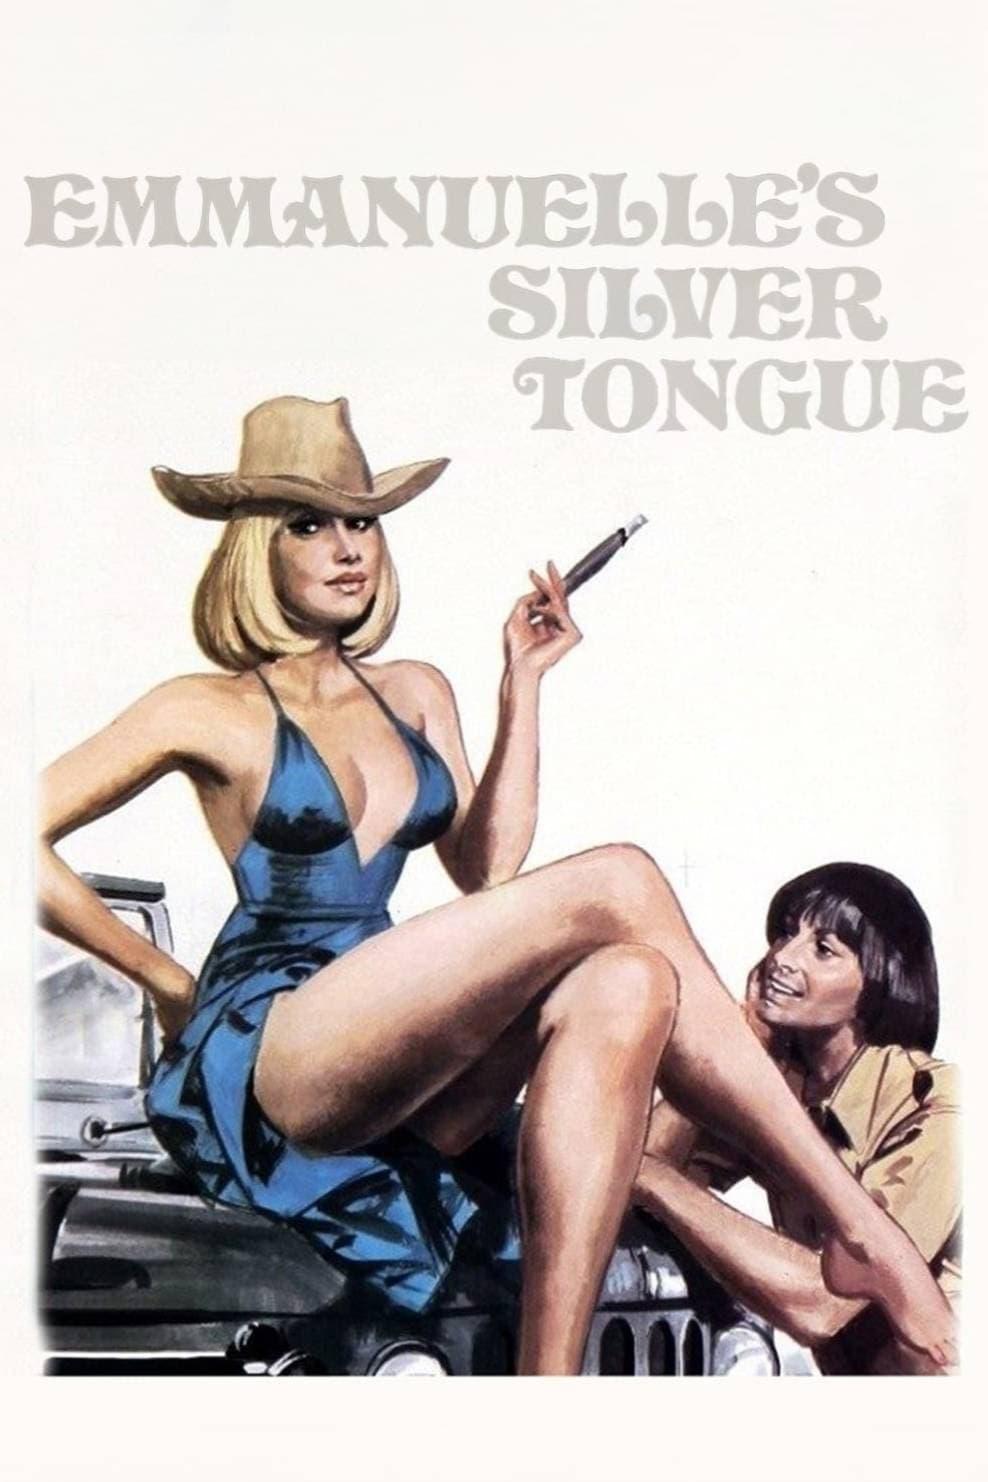 Emanuelle's Silver Tongue poster